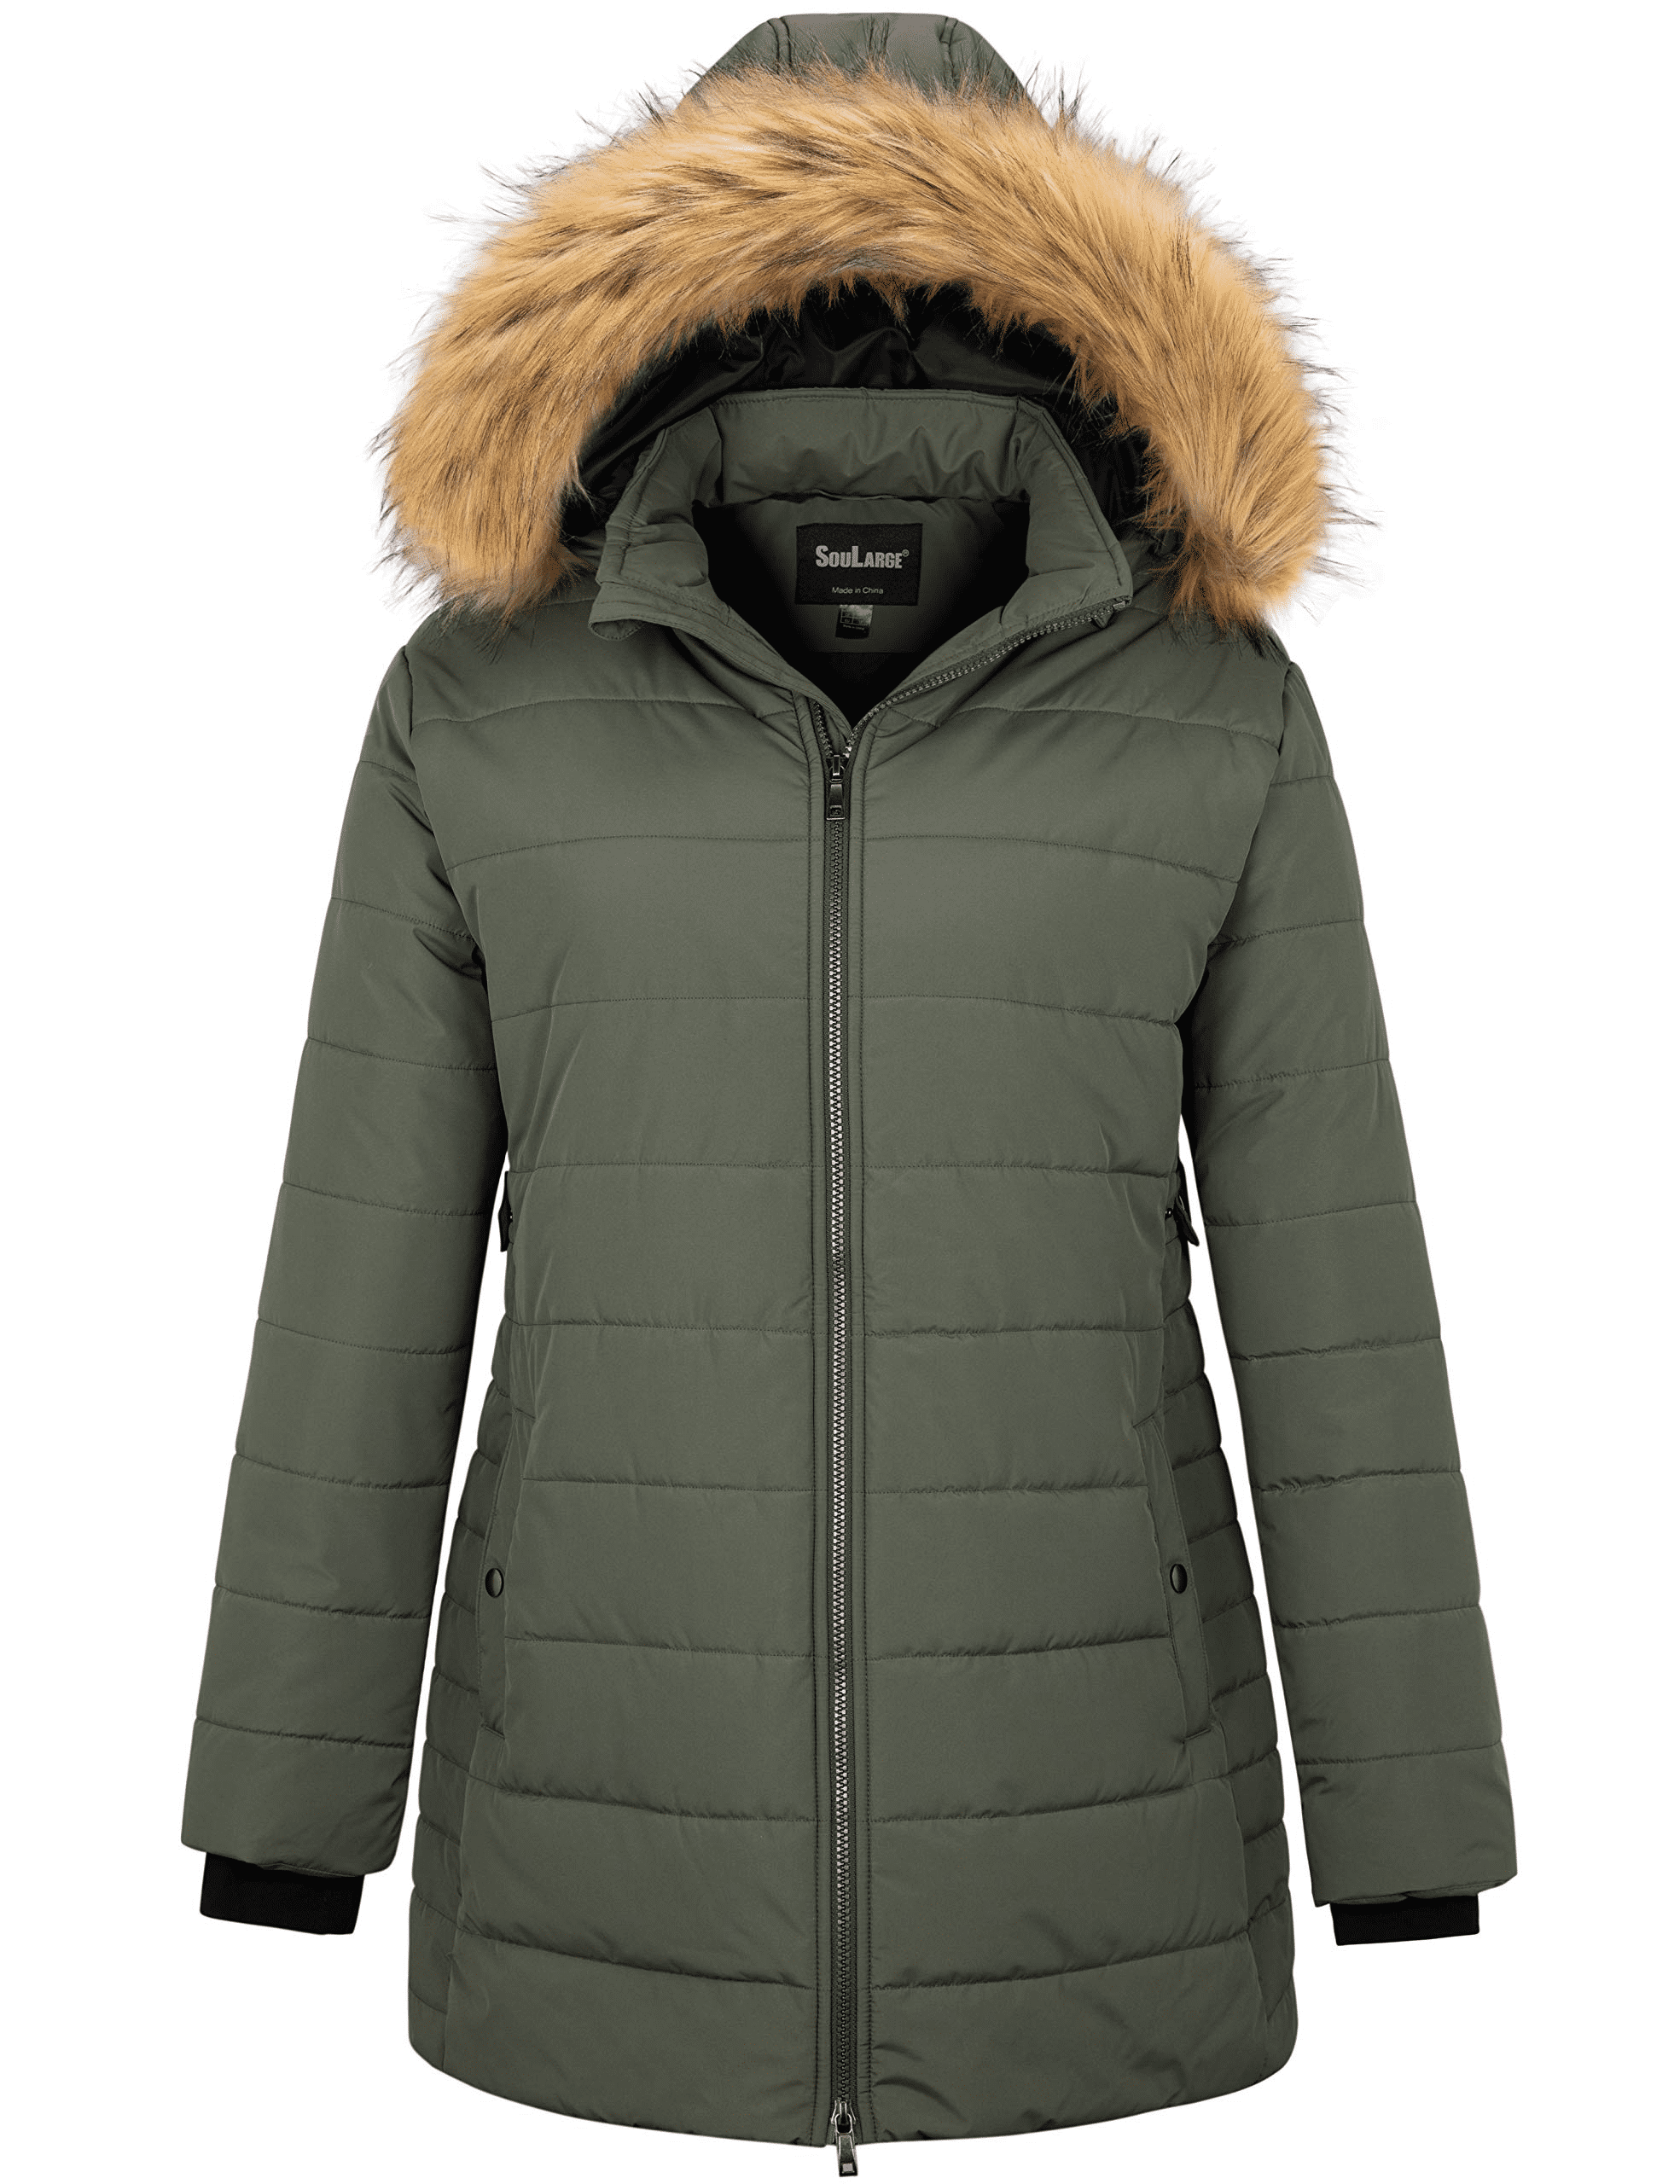 Soularge Women's Plus Size Winter Hooded Coat with Faux fur Trim (Army ...